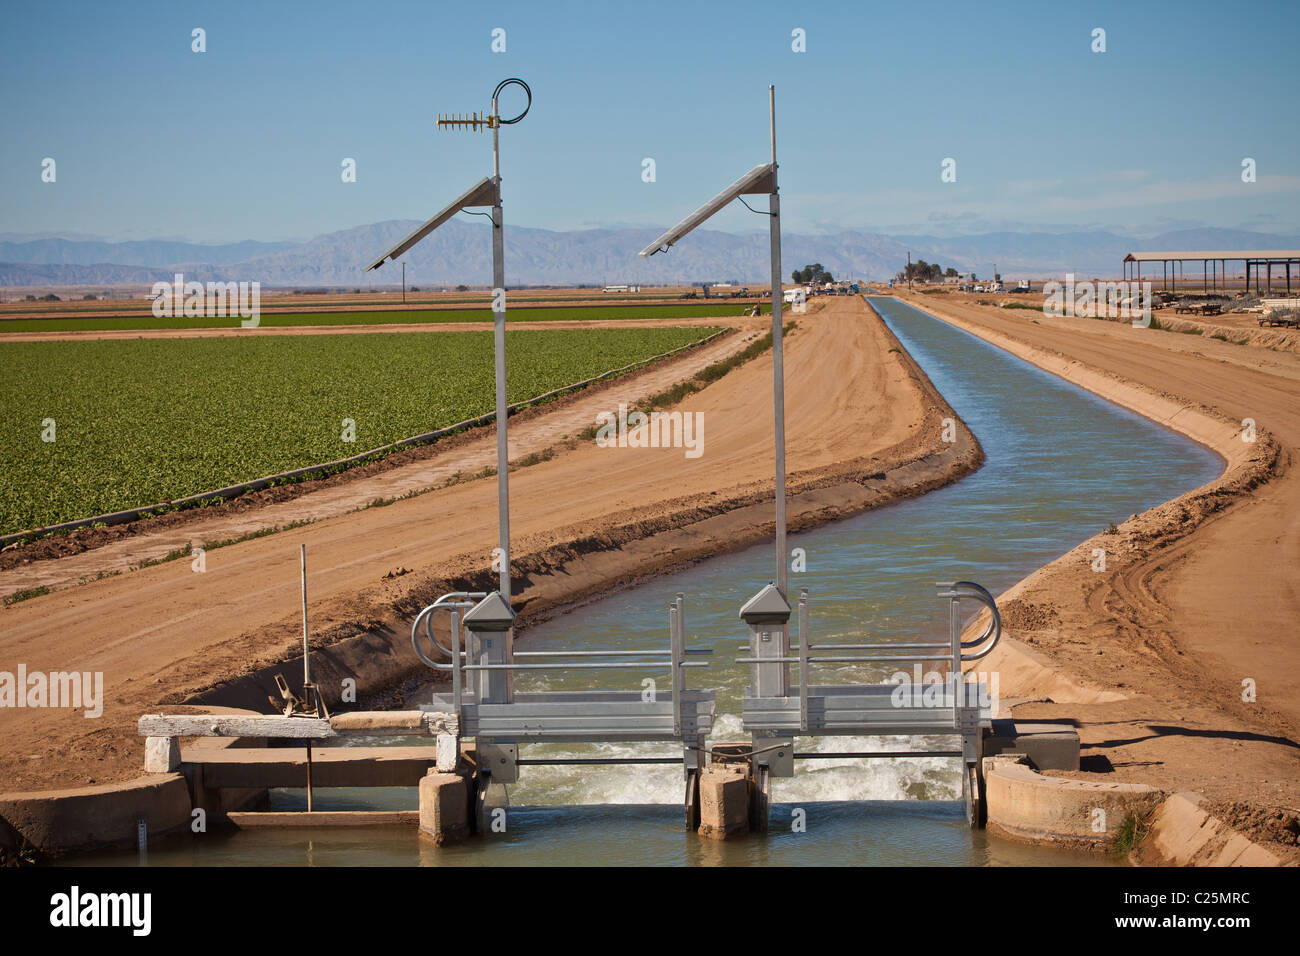 Solar powered irrigation locks in the Imperial Valley Niland, CA. Stock Photo